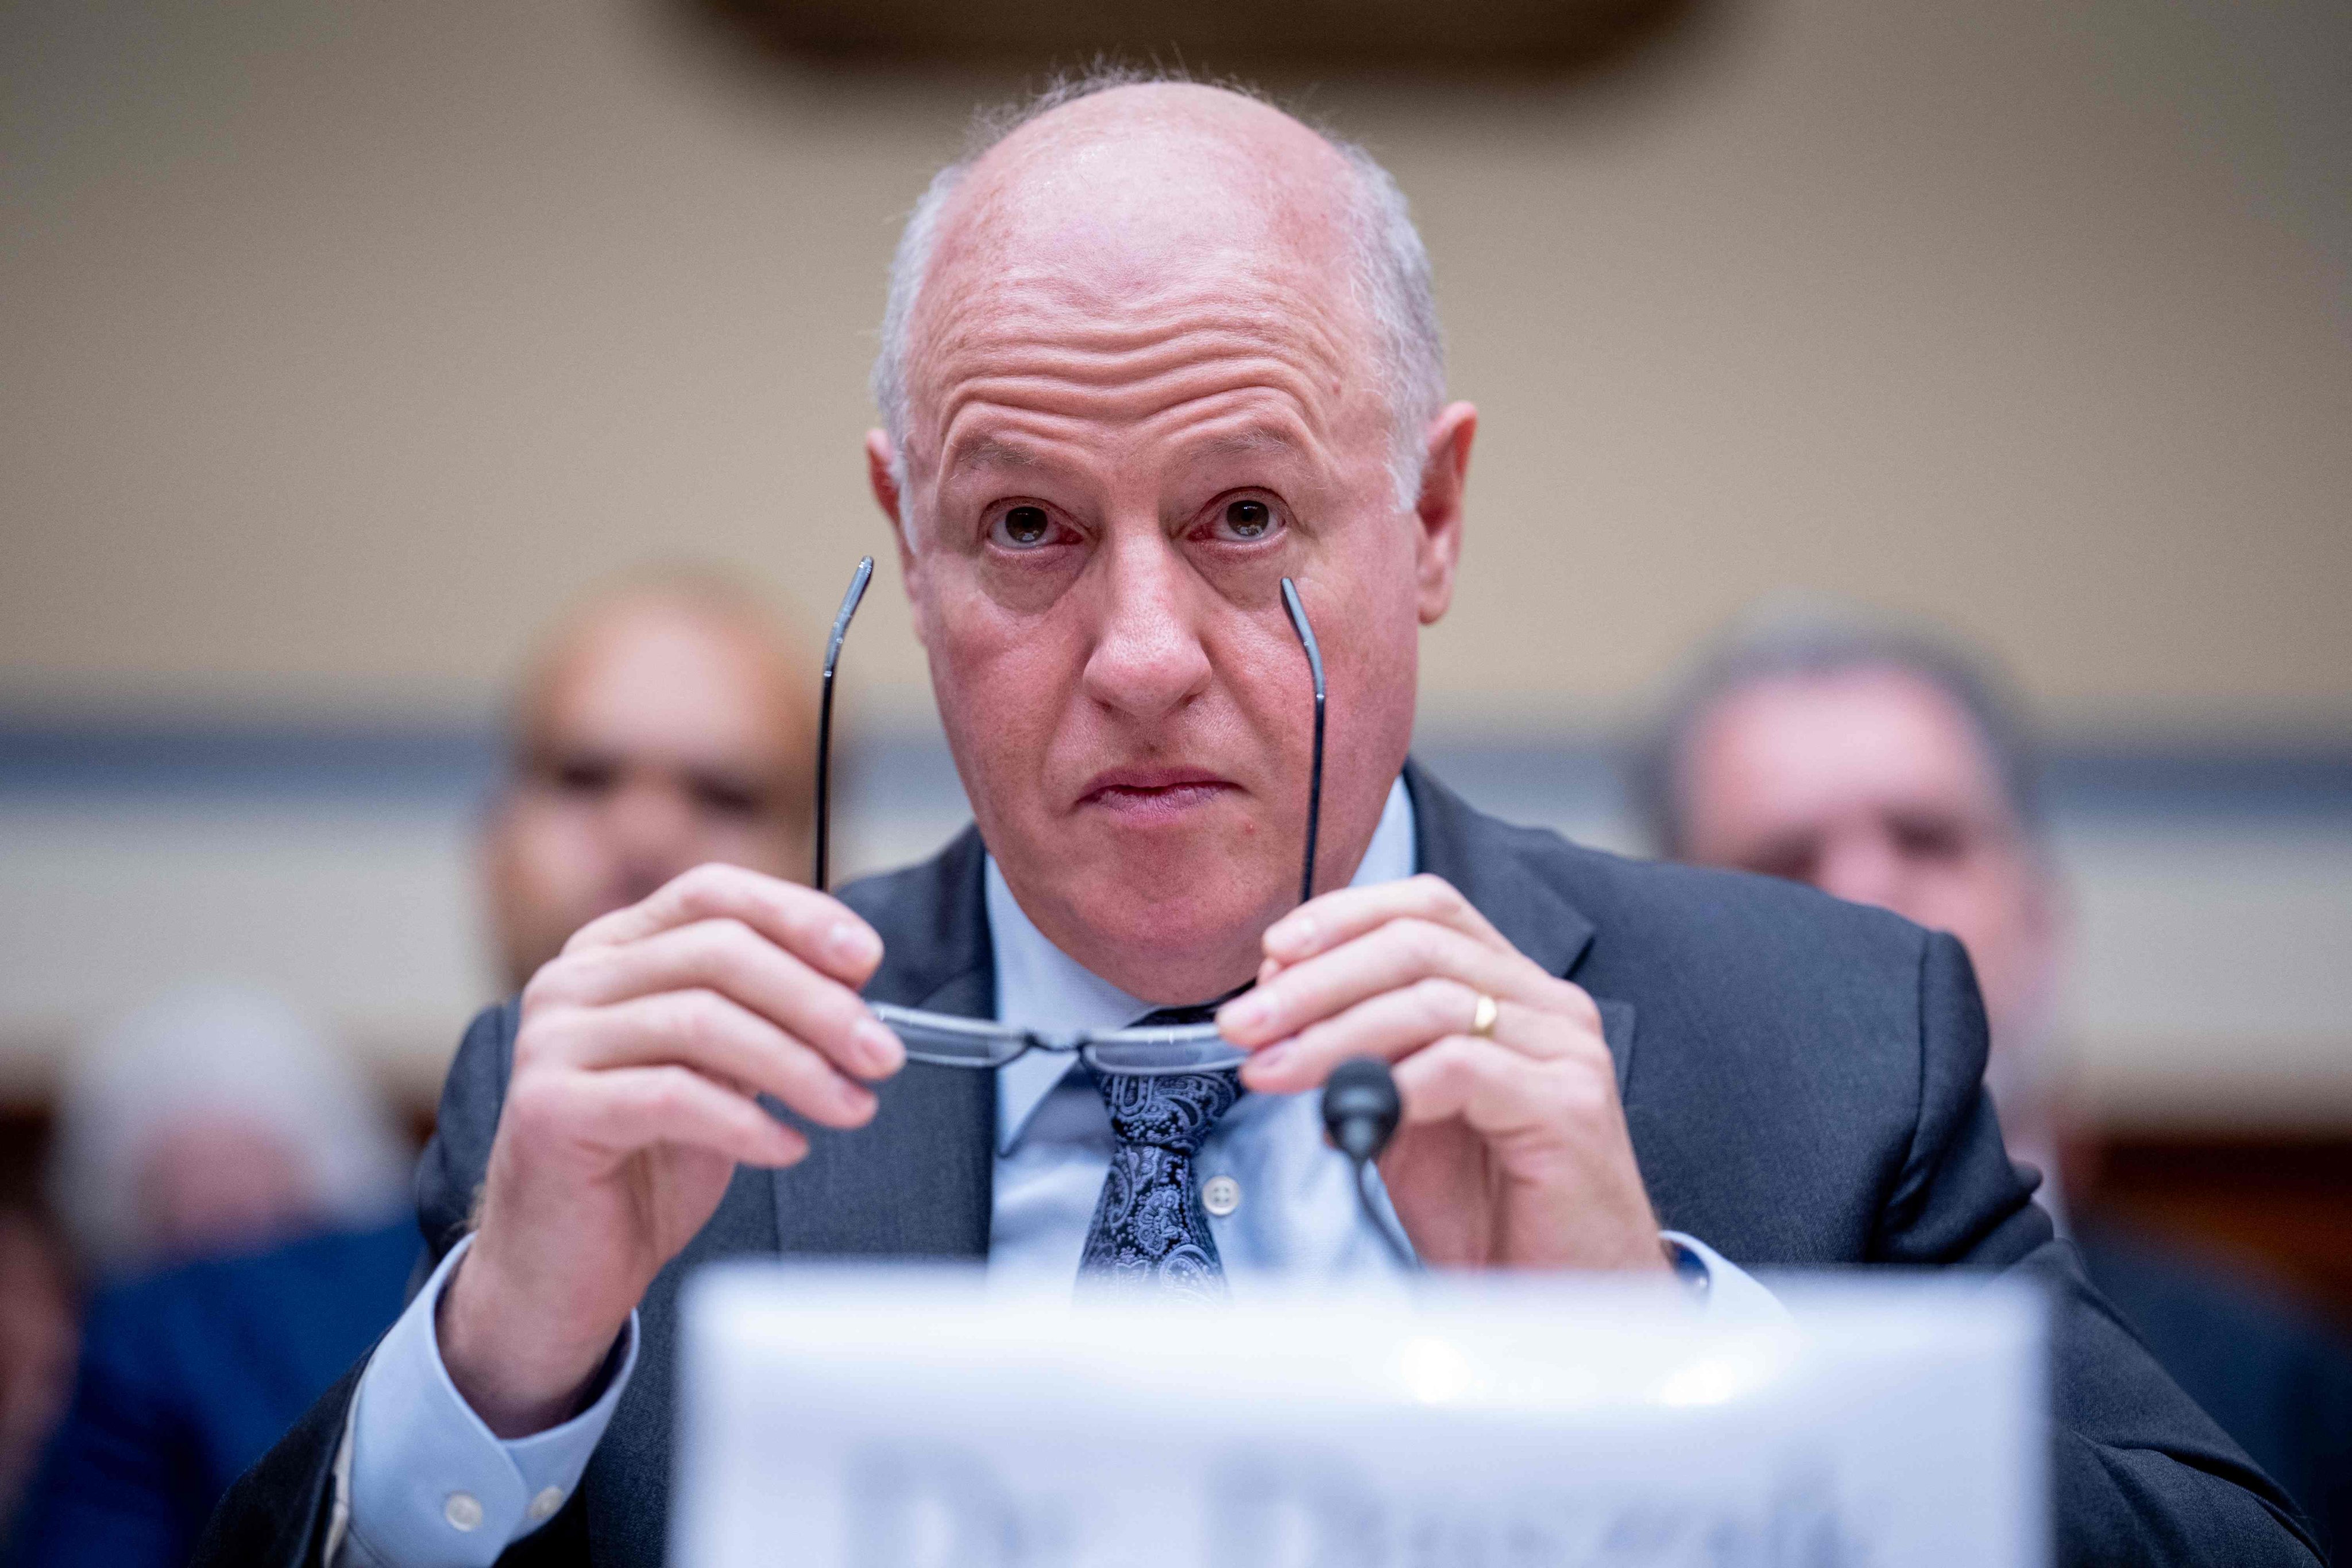 Peter Daszak, president of EcoHealth Alliance, testifies at a US House of Representatives select subcommittee hearing on the coronavirus pandemic. Photo: Getty Images via AFP